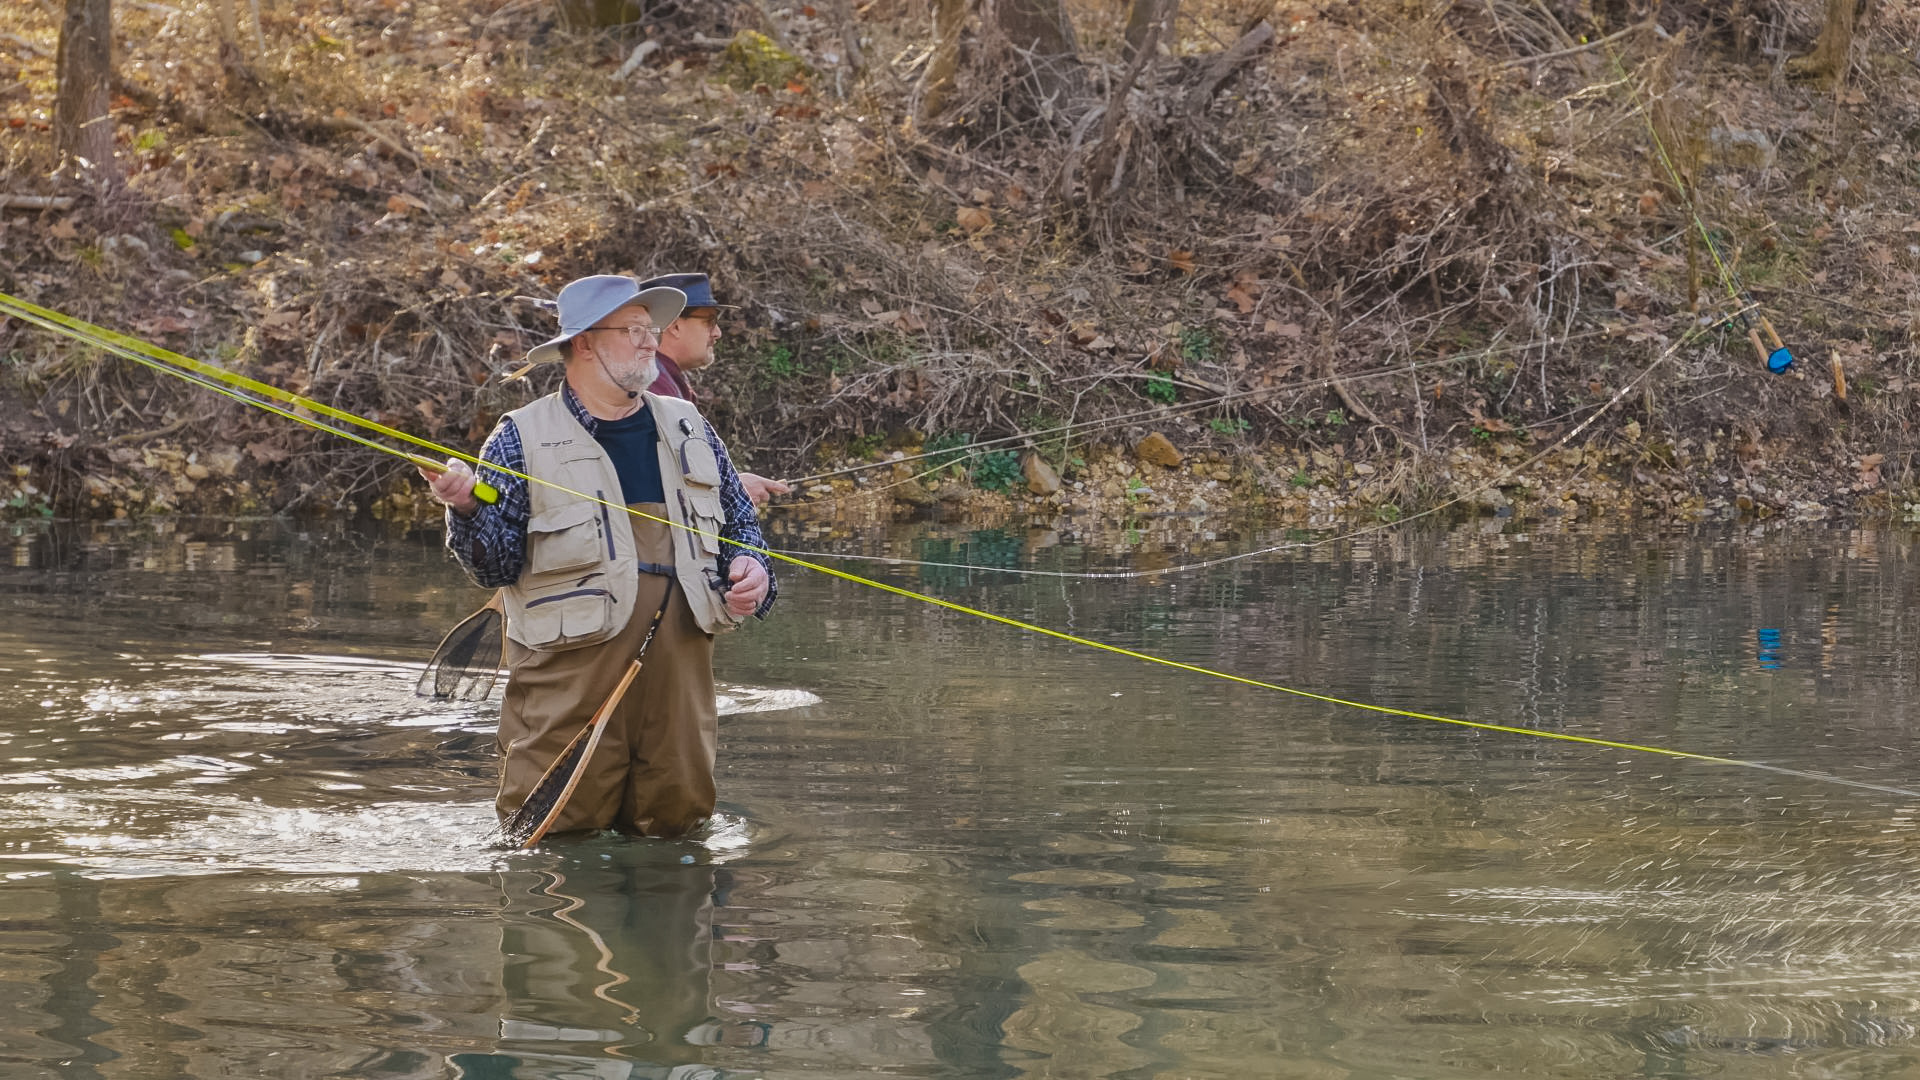 Trout-fishing mania begins with statewide lowland lakes opener